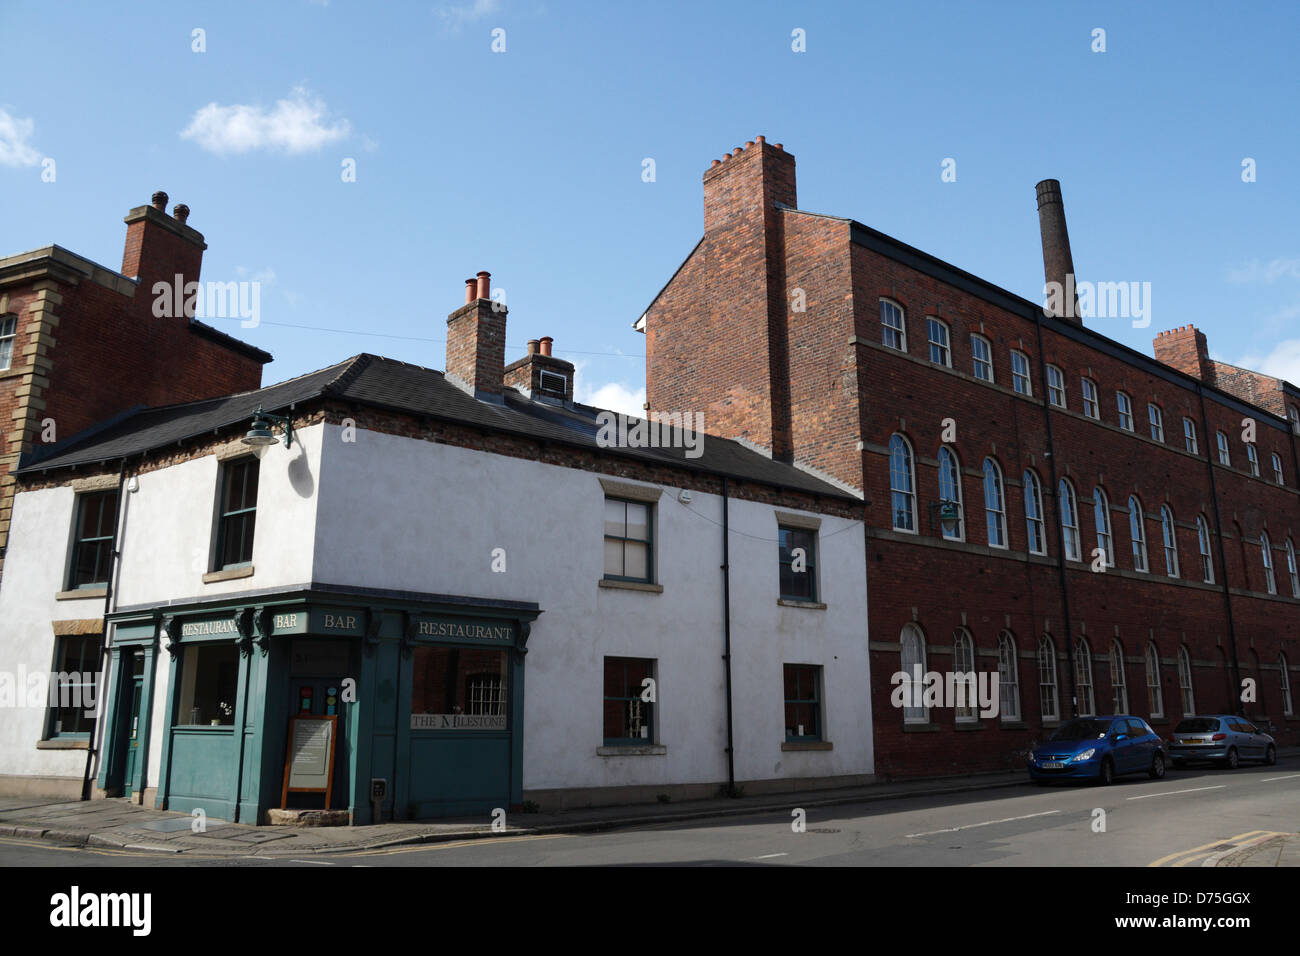 The Milestone revamped corner pub and old factory converted to homes in Kelham Island Sheffield England. gastro pub restaurant Stock Photo